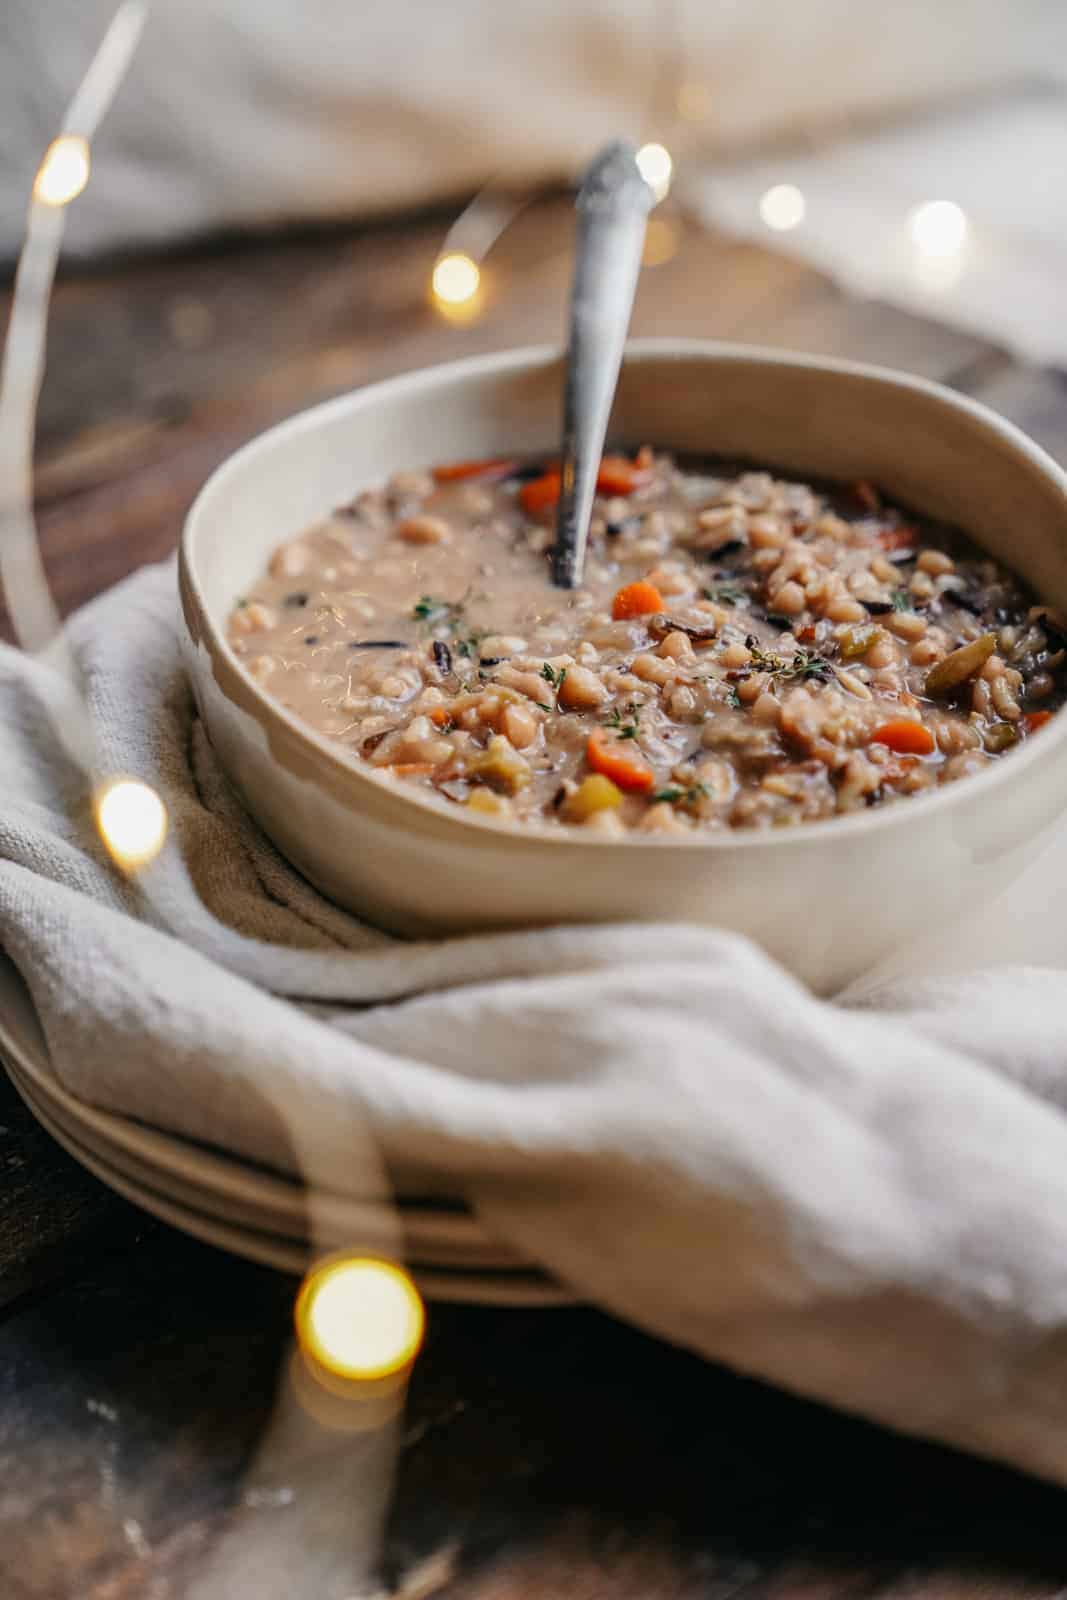 Tasty and nourishing vegan pot pie filling with beans, brown rice and vegetables